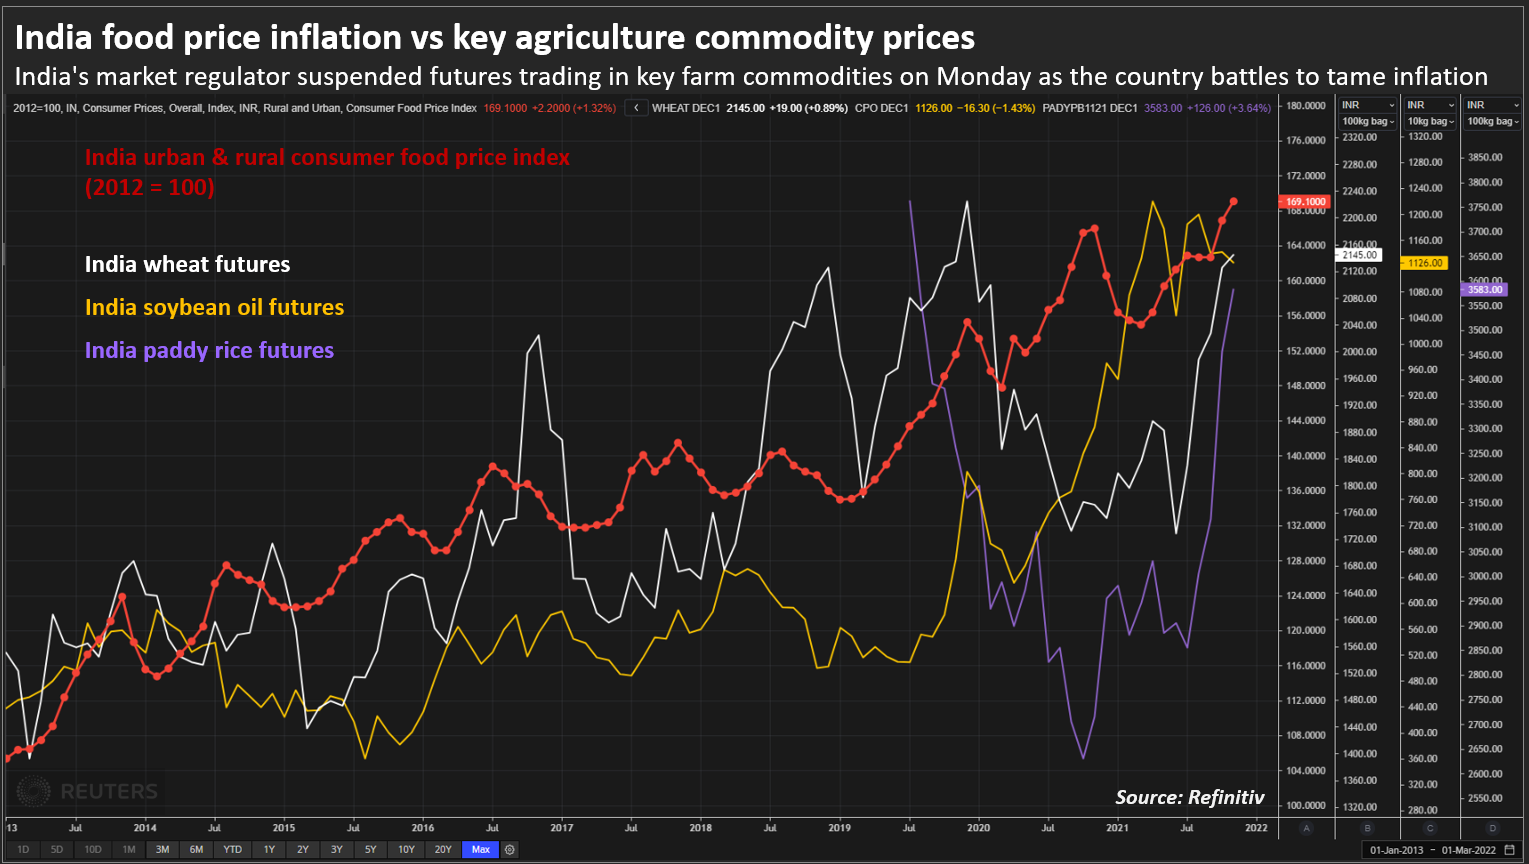 India food price inflation vs key agriculture commodity prices